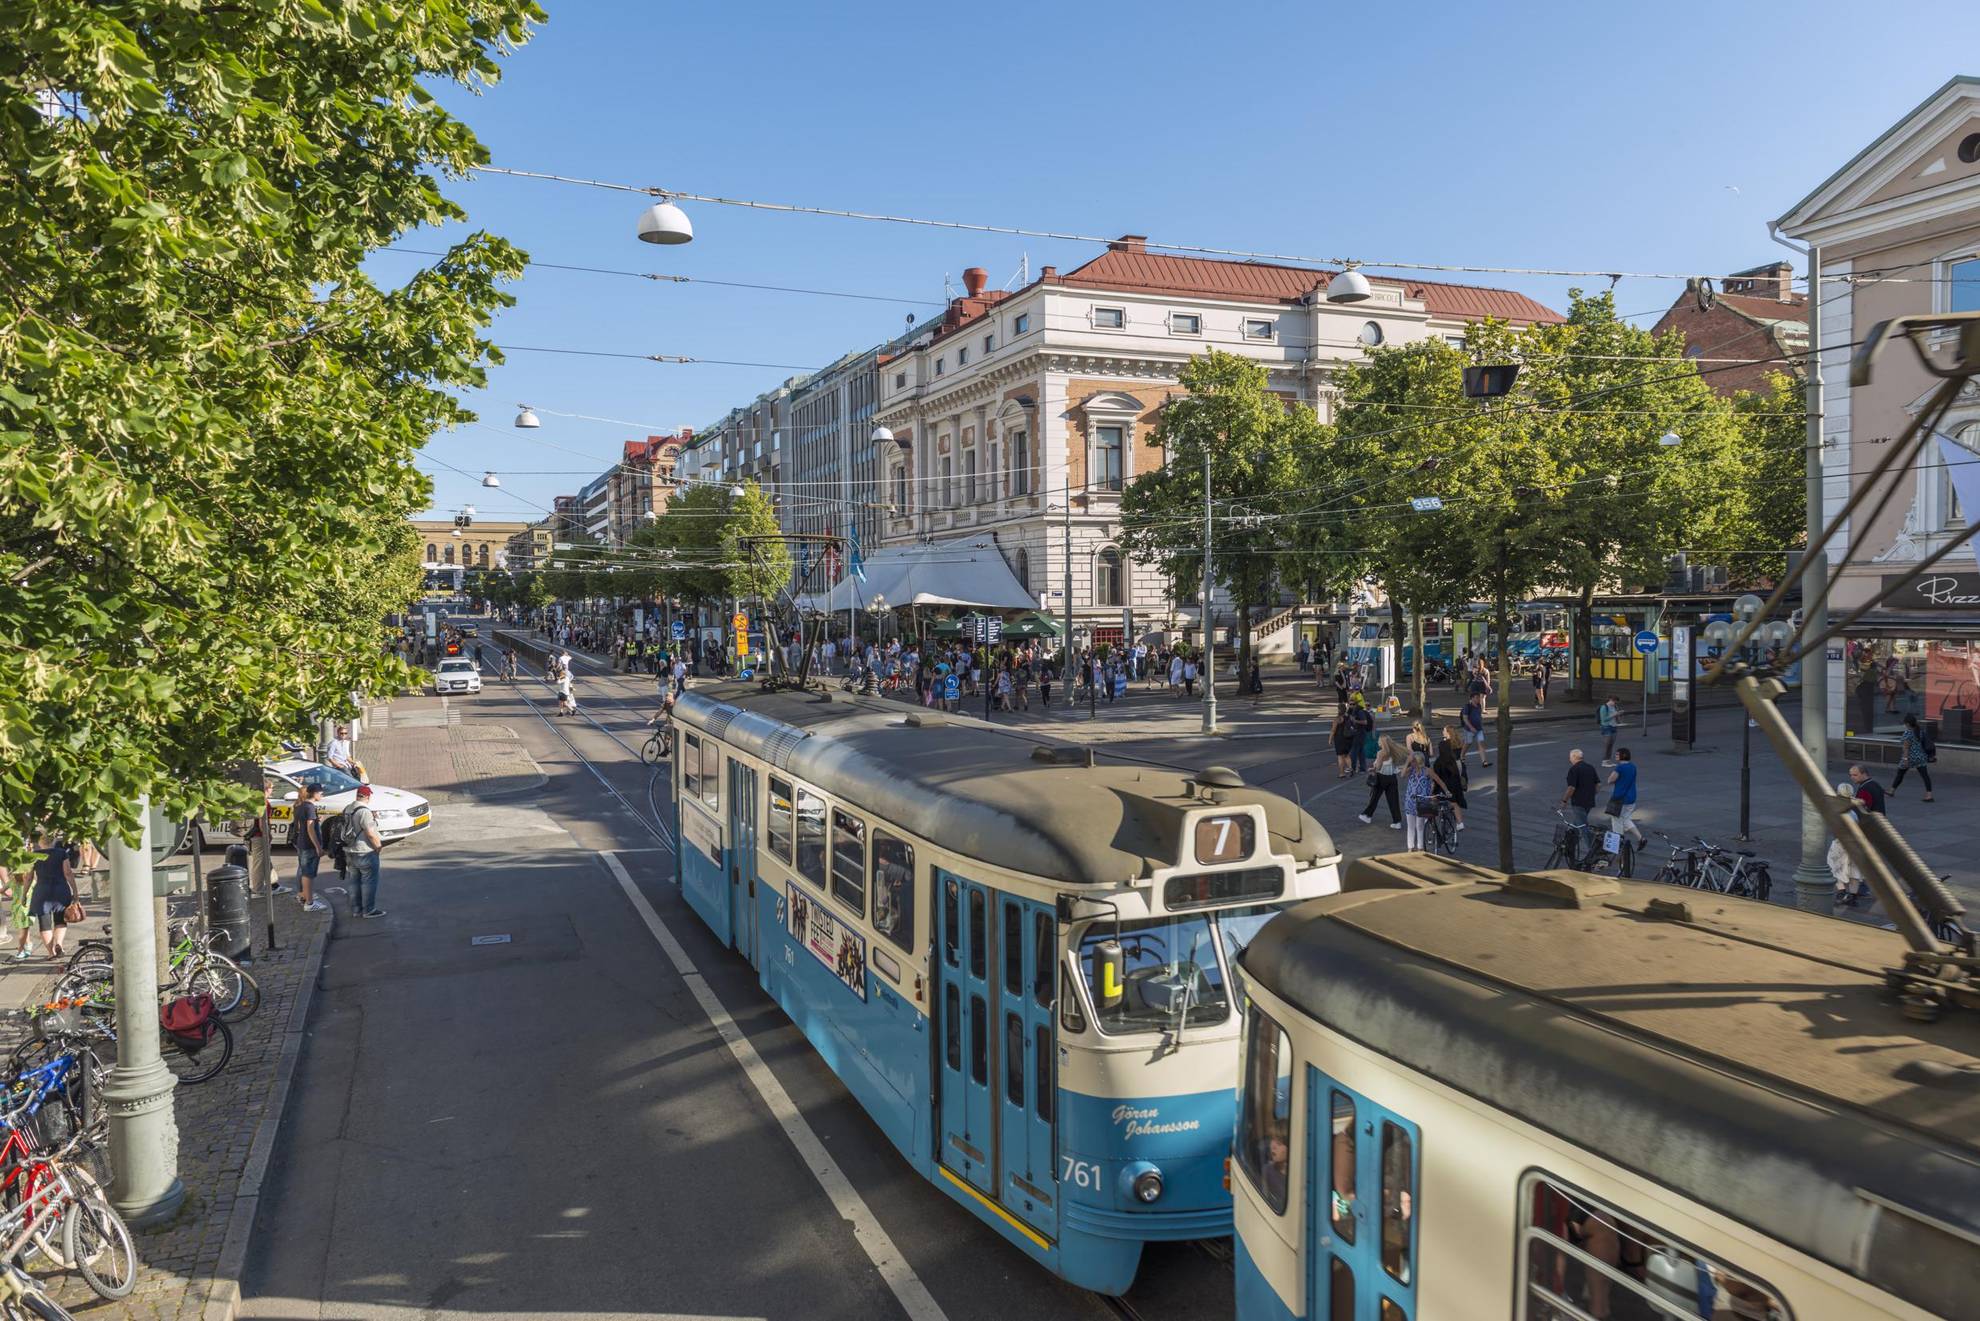 A classic tram passes the street Avenyn in Gothenburg, busy with pedestrians and lined with trees.